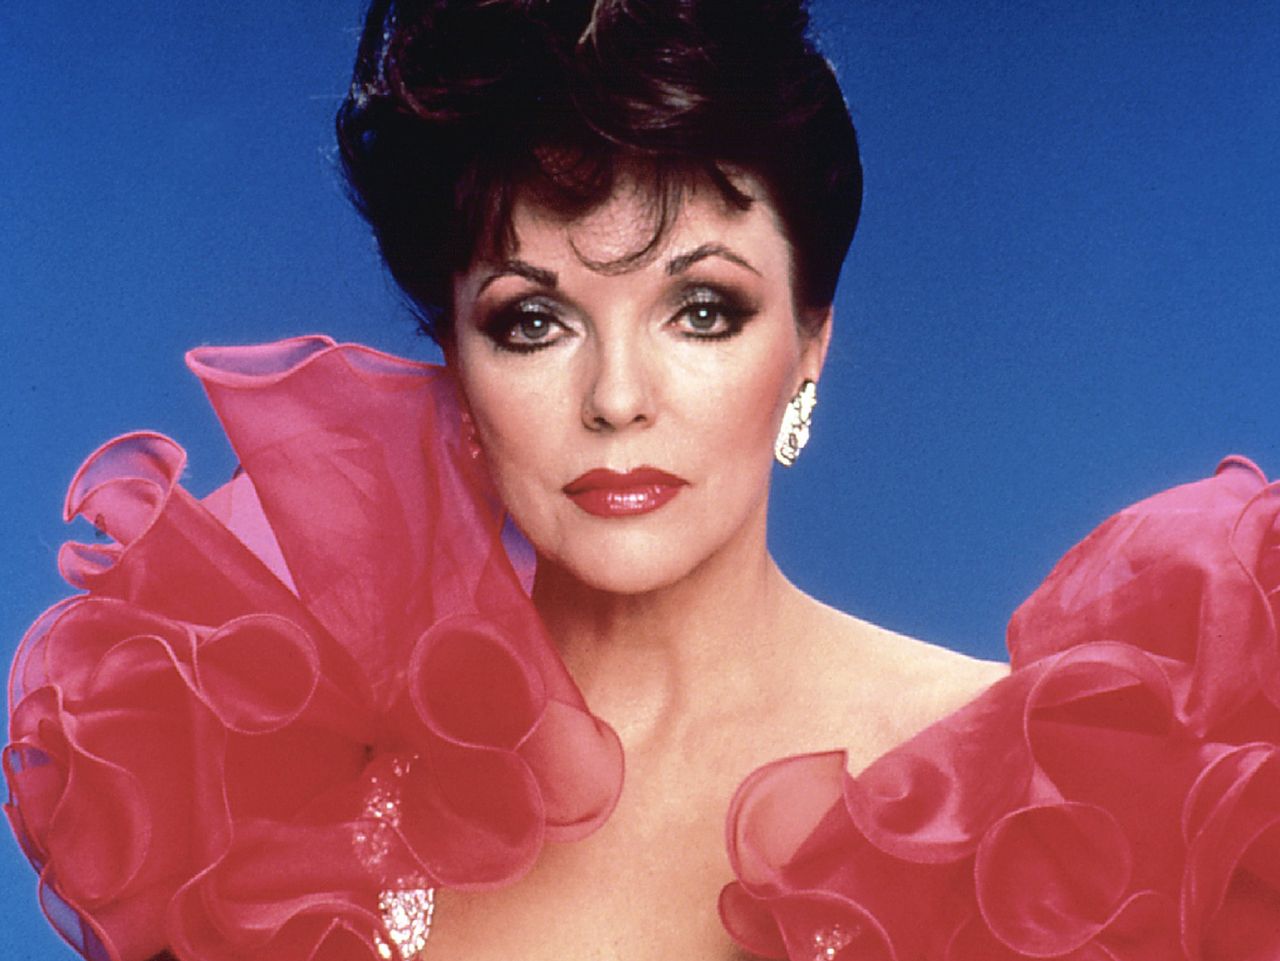 Joan Collins at 91: A life of glamour and scandal